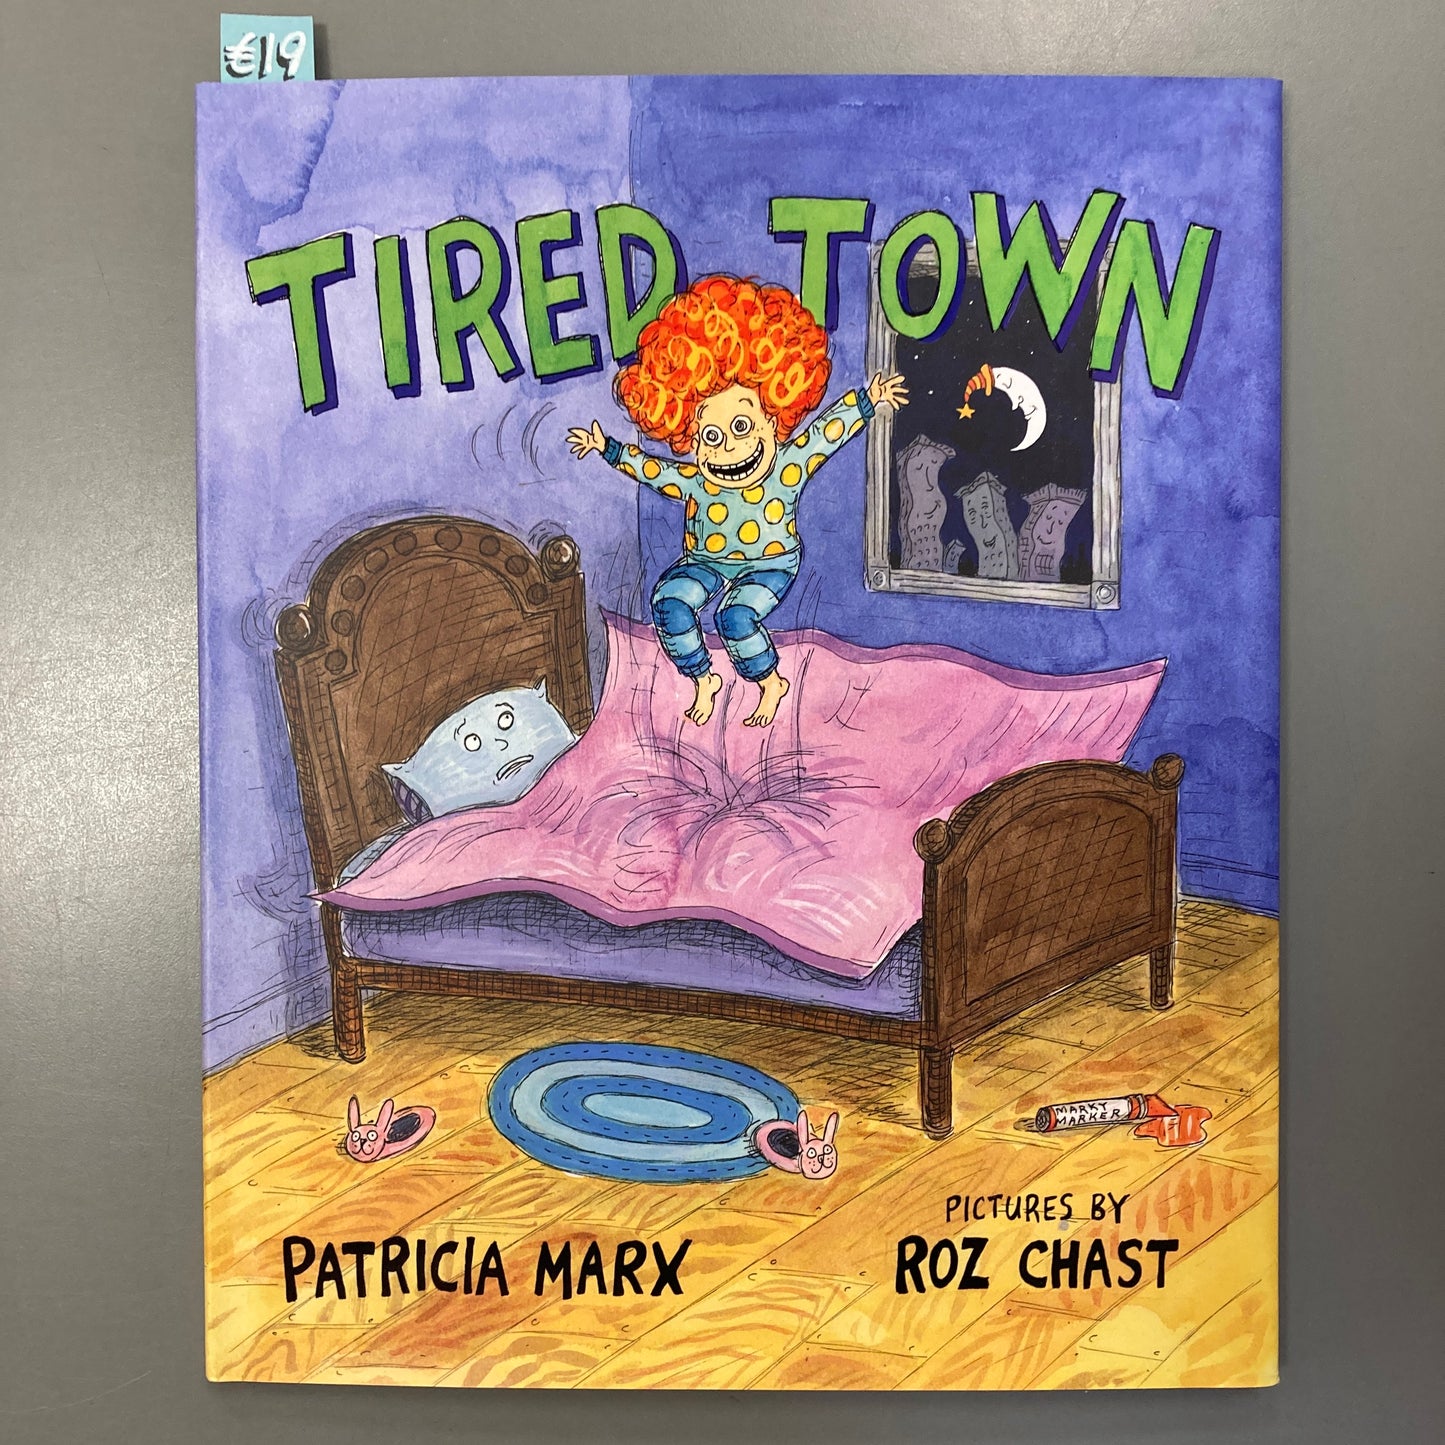 Tired Town